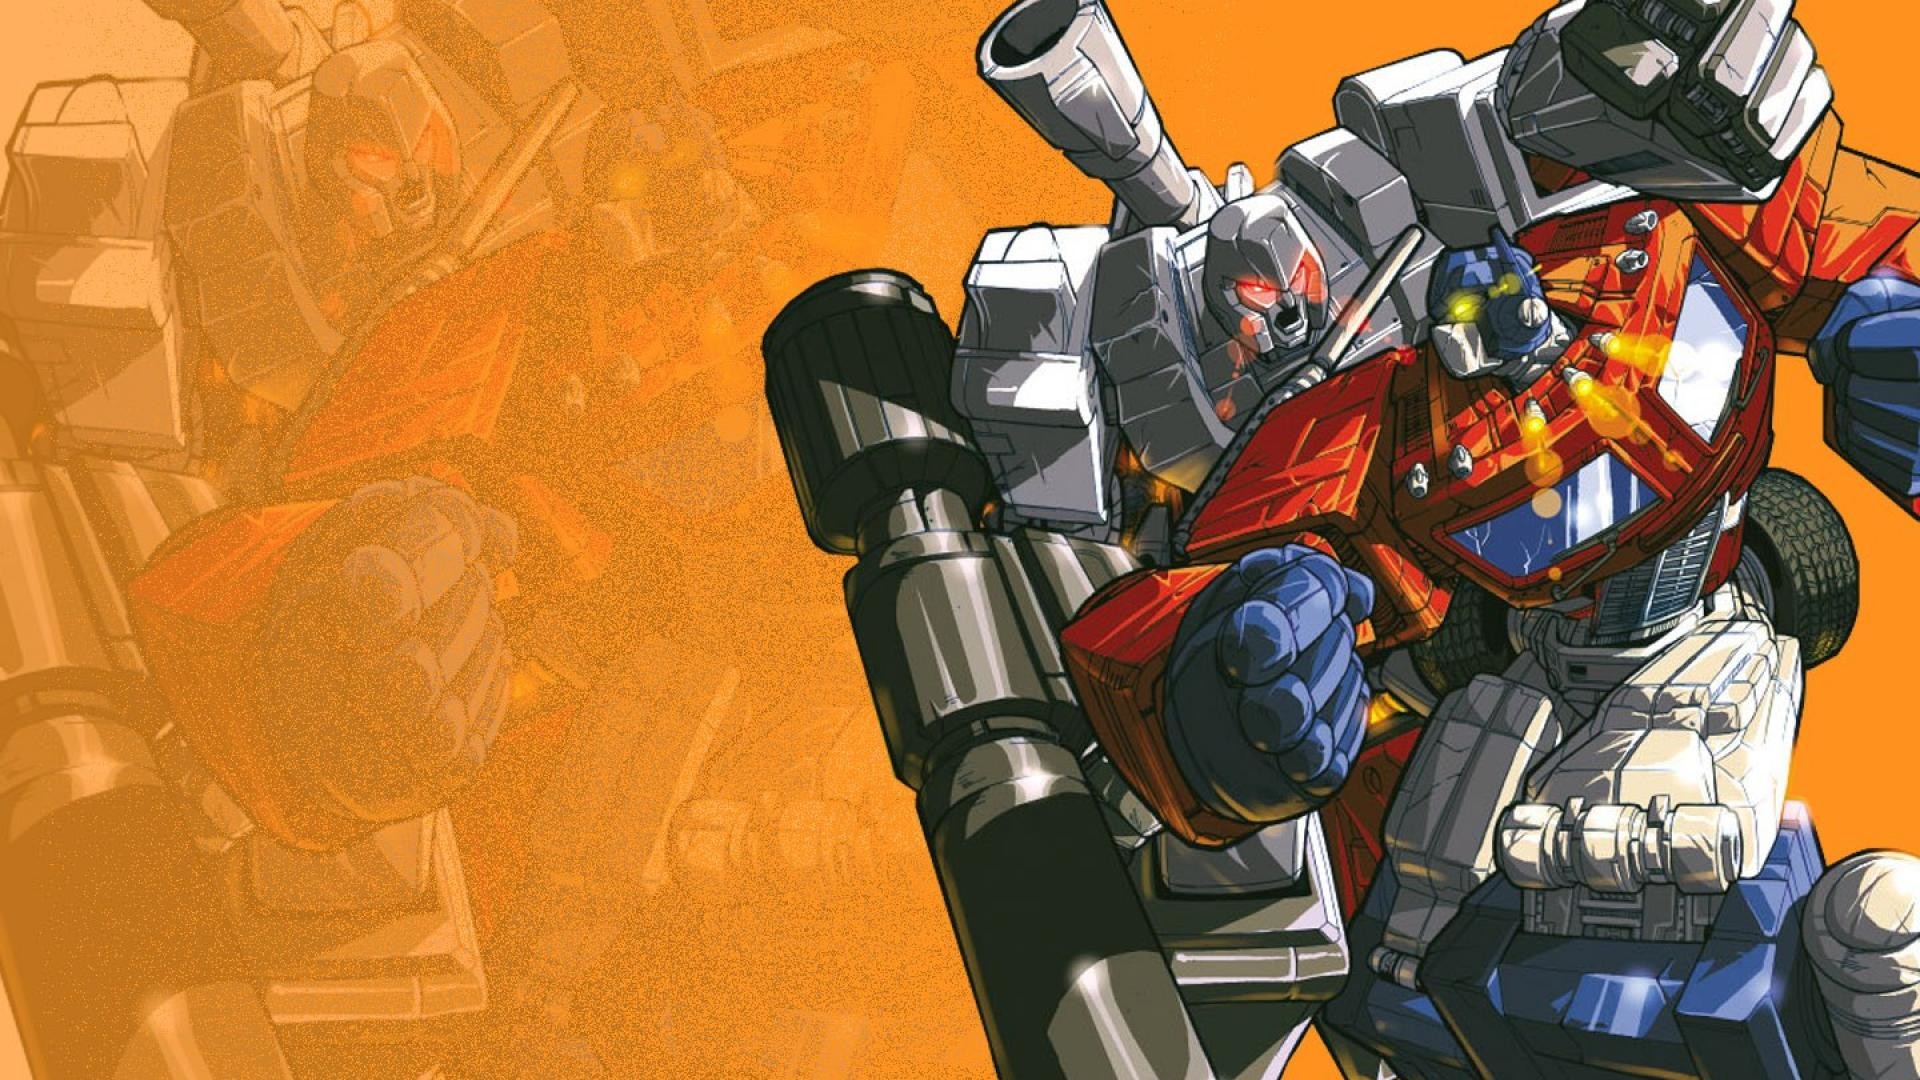 1920x1080 Transformers wallpaper 1440x900 - (#30459) - High Quality and .